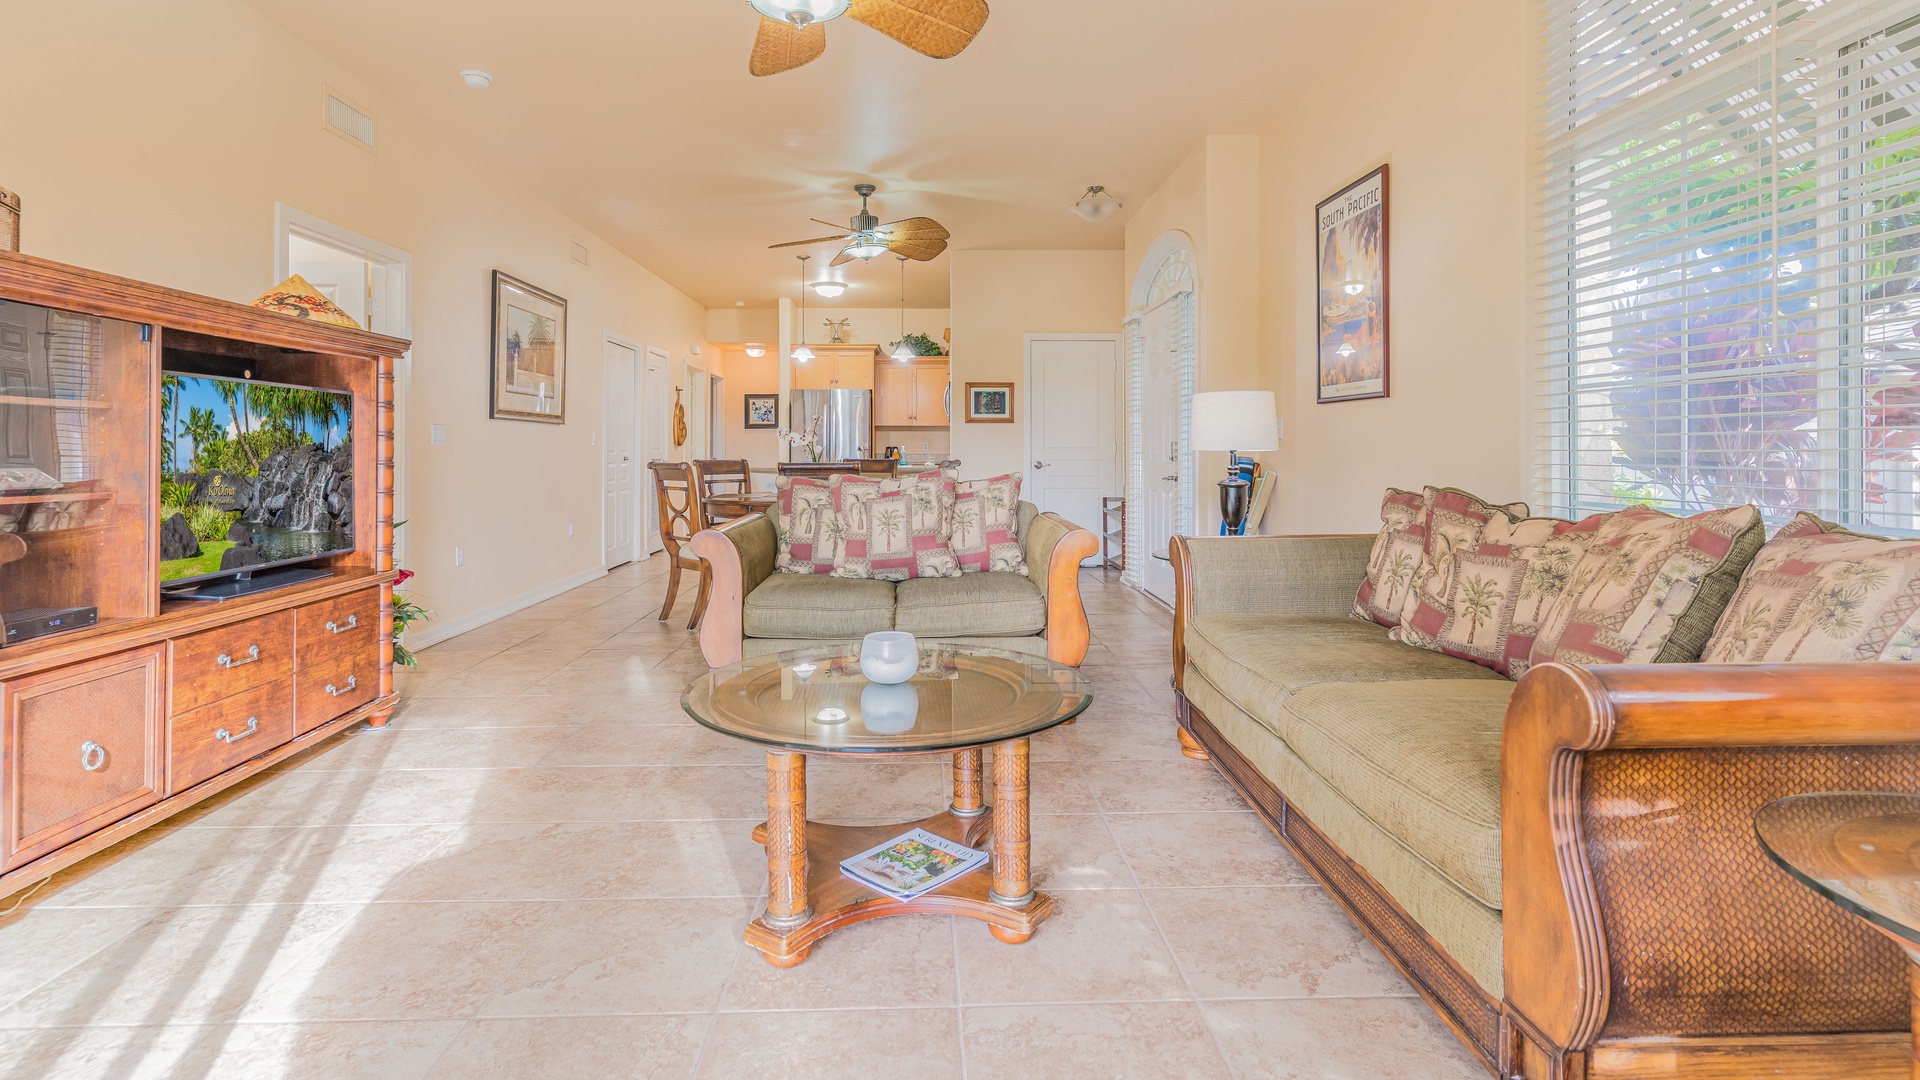 Kapolei Vacation Rentals, Kai Lani 8B - With ceiling fans and conversational spaces, you can unwind and renew.